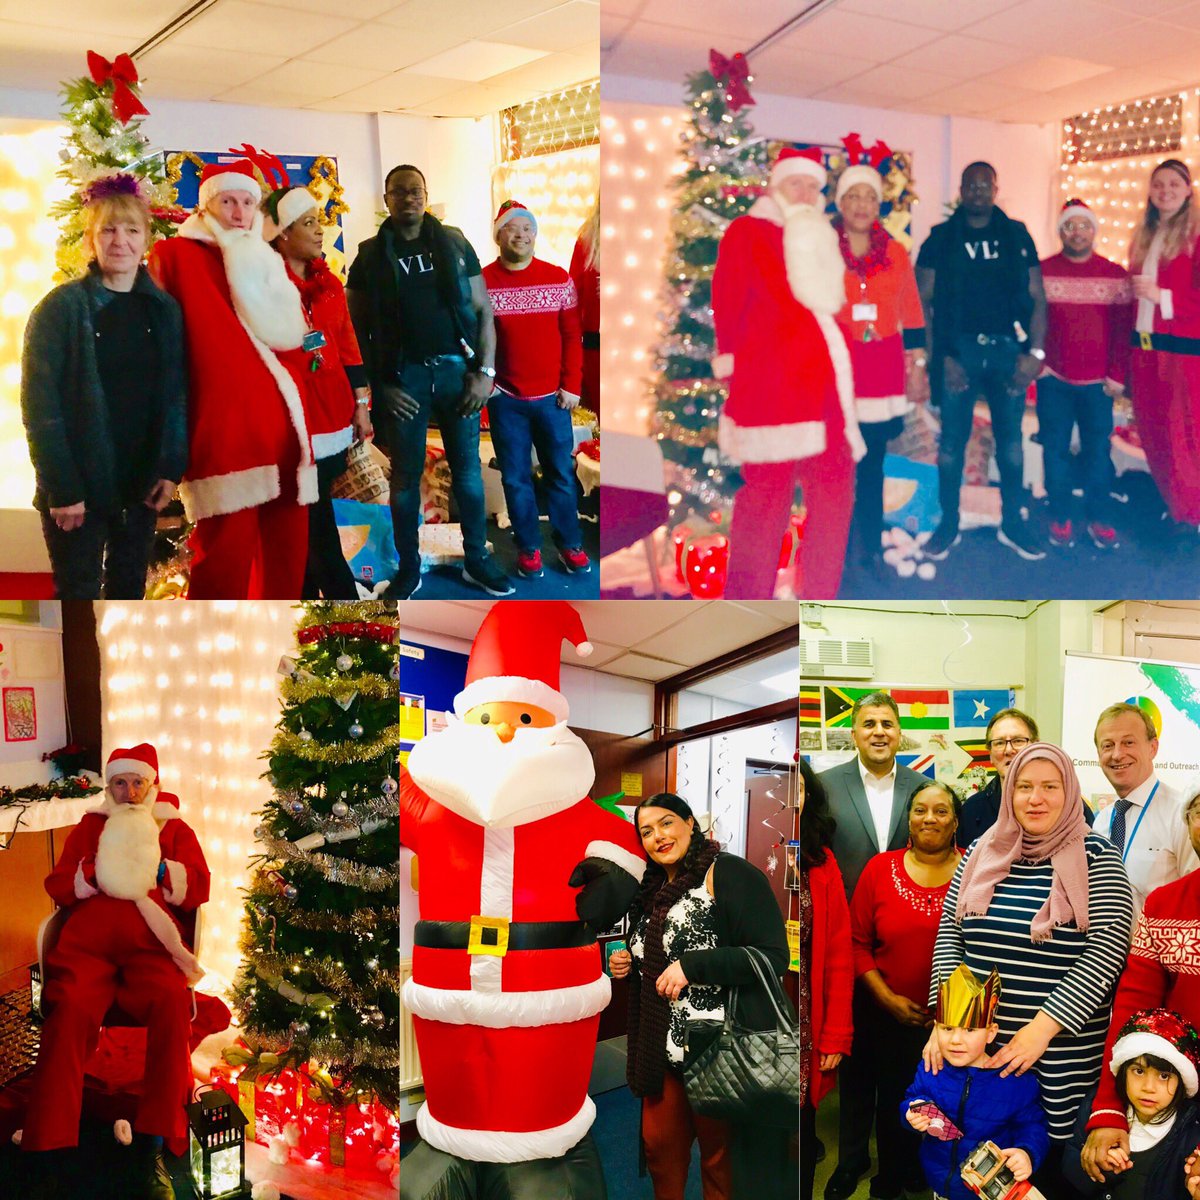 Lincoln Green Christmas Event. Santa giving presents, free food & drinks, Xmas themed photo booth & songs with our guitarist plus food parcels. Christmas giving and helping the community. 
#communitygiving #xmaskindness
 @Touchstone_Spt @asgharlab @rongrahame @alison_4life